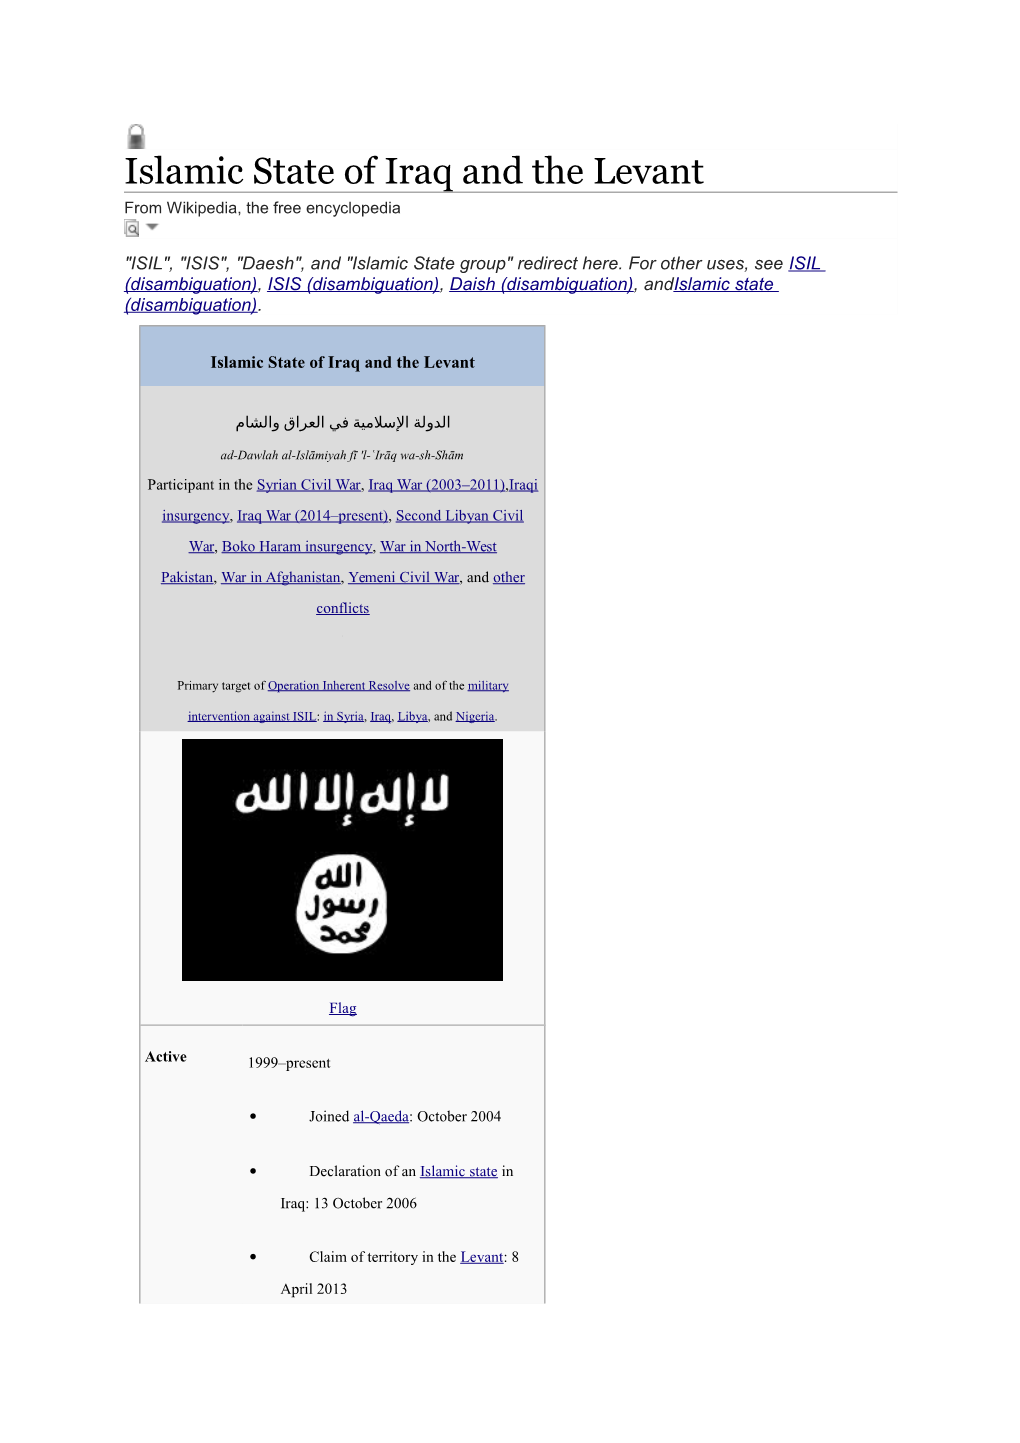 Islamic State of Iraq and the Levant from Wikipedia, the Free Encyclopedia